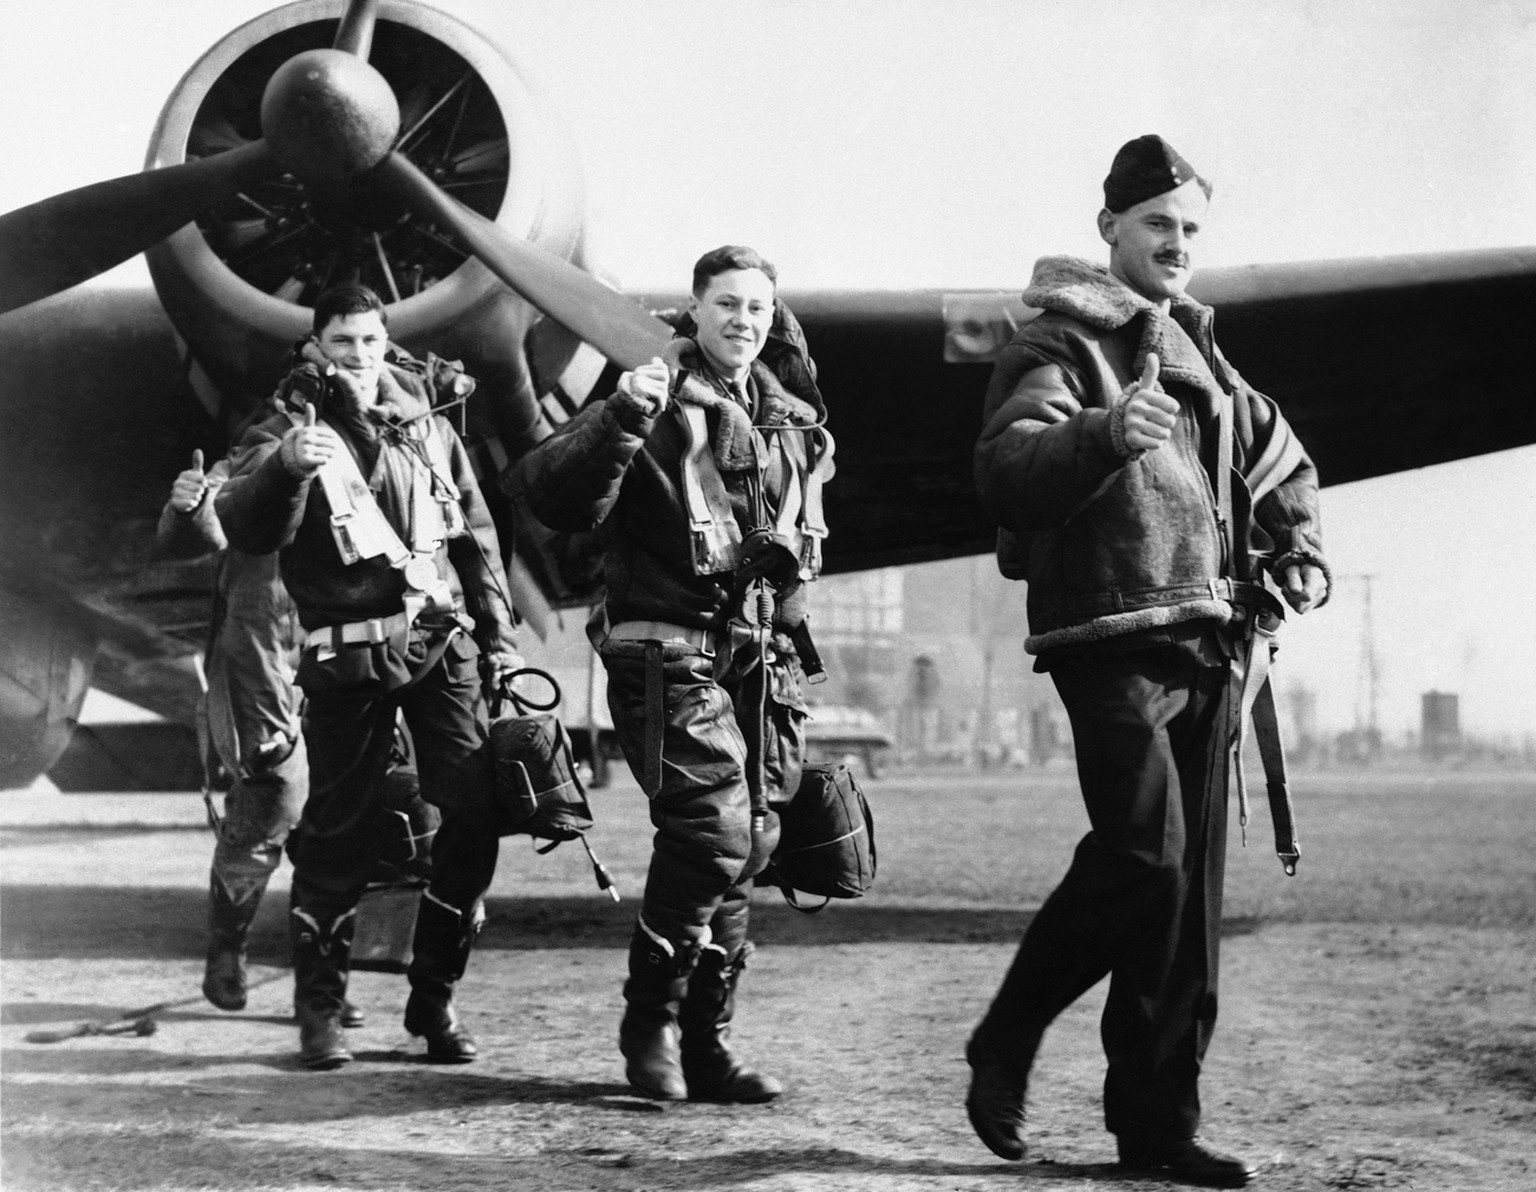 These members of a British Royal Air force bombing squadron hold thumbs up ñ A gesture signifying a Nazi warship has been sunk ñ as they return to their home base, April 22, 1940, from an attack on Ge ...